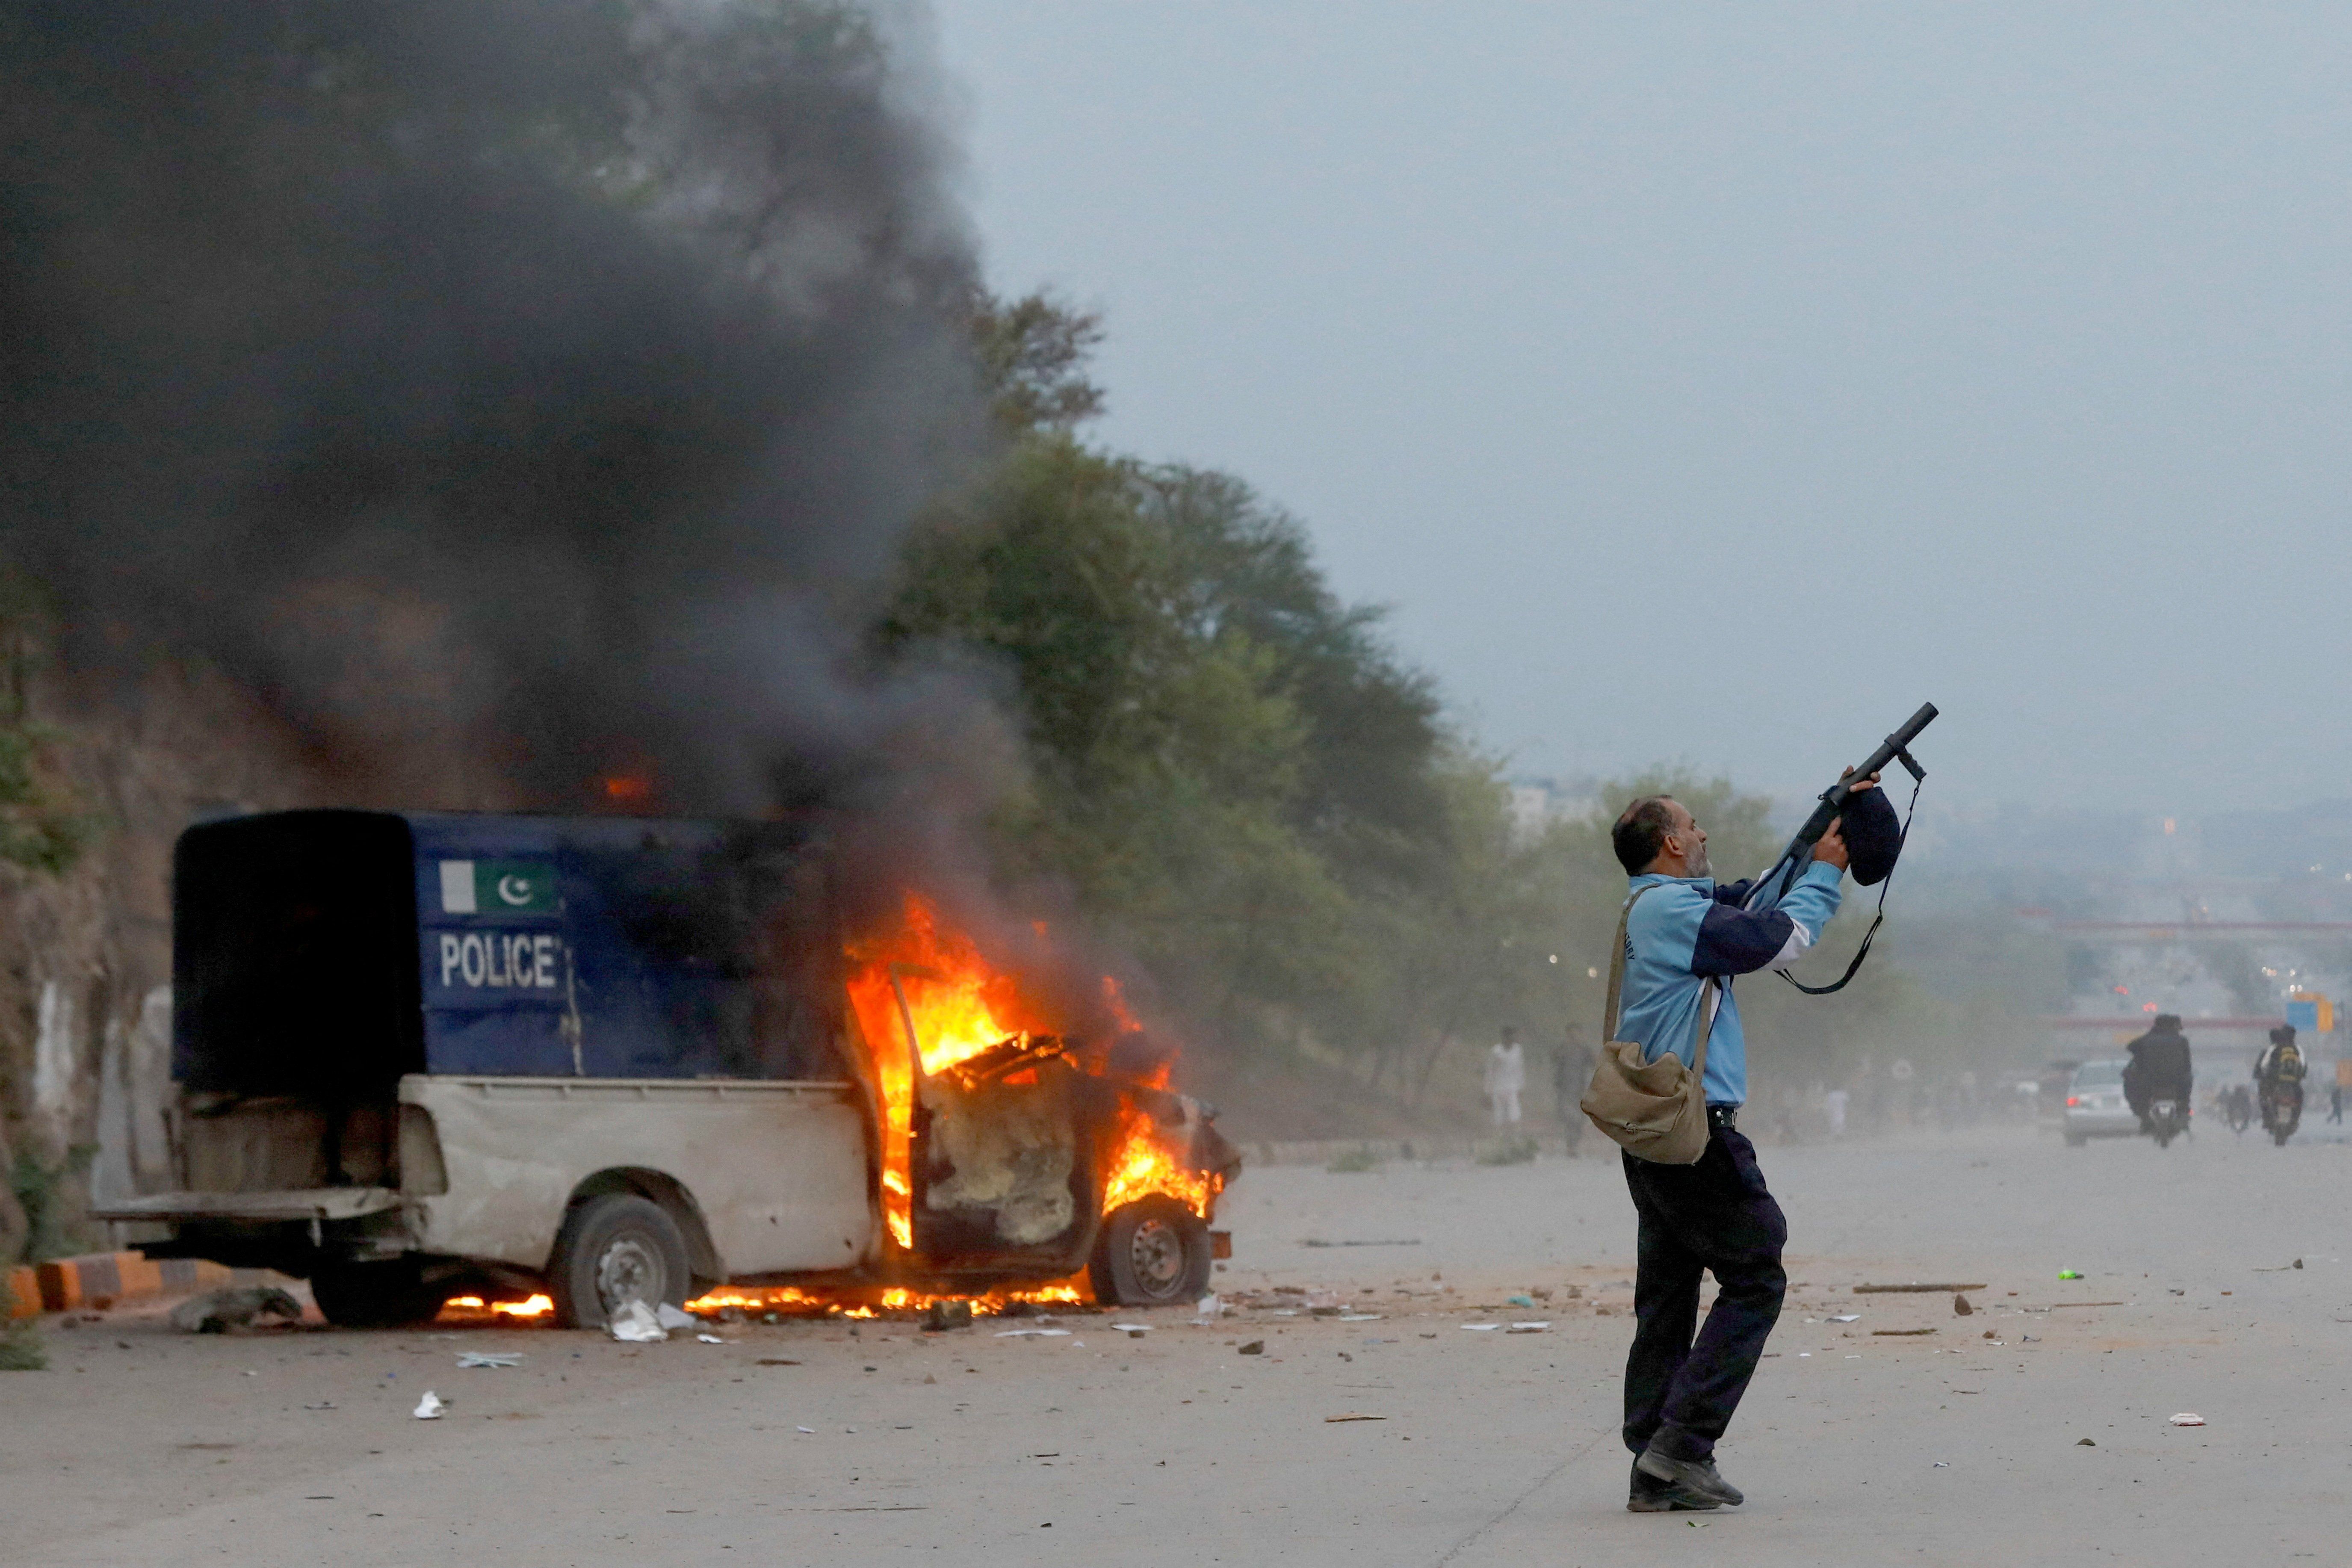 A police officer fires a tear gas can as supporters of former Pakistani Prime Minister Imran Khan clash with police outside a Federal Judicial Complex in Islamabad.